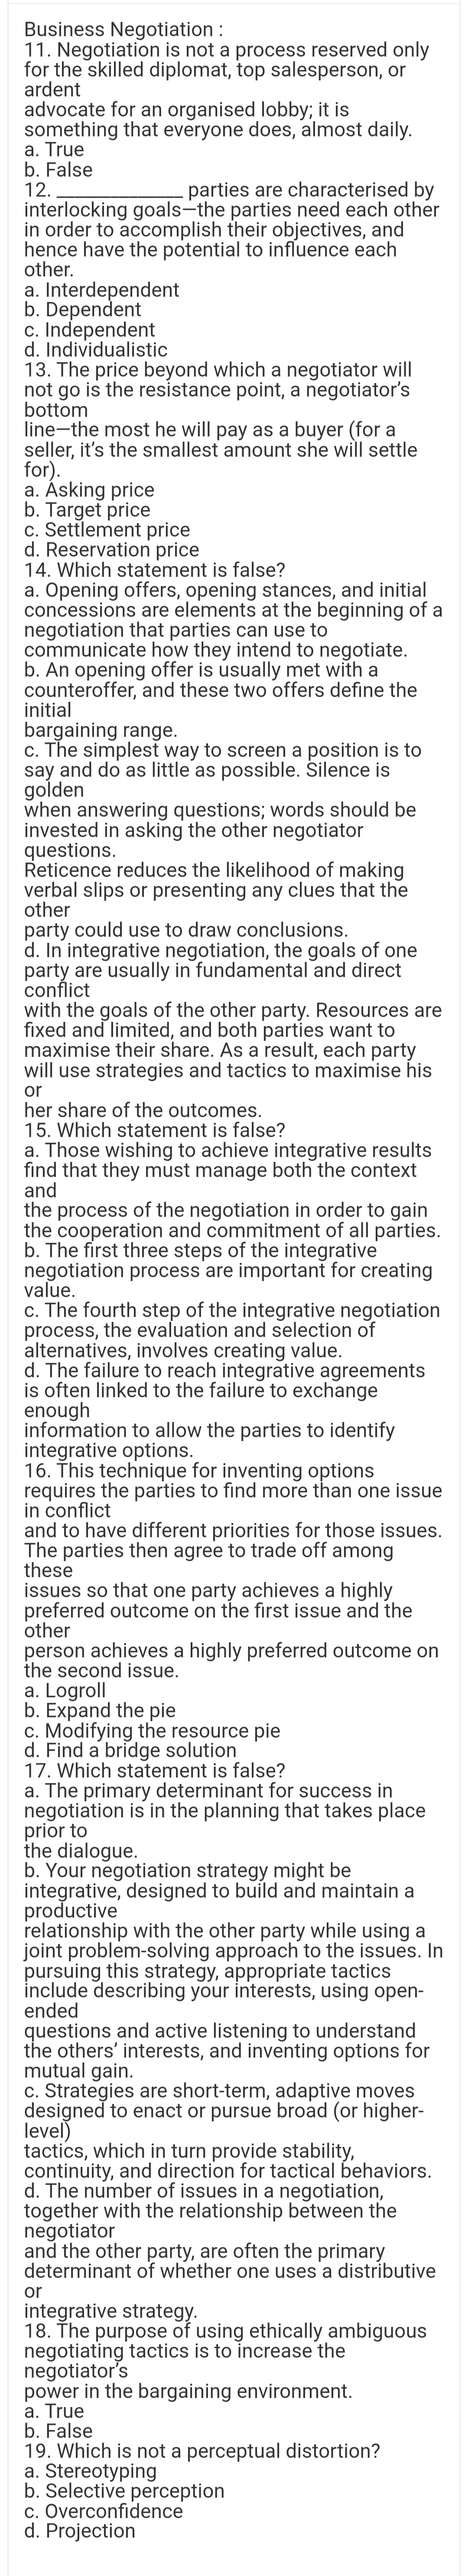 Business Negotiation :
11. Negotiation is not a process reserved only
for the skilled diplomat, top salesperson, or
ardent
advocate for an organised lobby; it is
something that everyone does, almost daily.
a. True
b. False
12.
parties are characterised by
interlocking goals-the parties need each other
in order to accomplish their objectives, and
hence have the potential to influence each
other.
a. Interdependent
b. Dependent
c. Independent
d. Individualistic
13. The price beyond which a negotiator will
not go is the resistance point, a negotiator's
bottom
line-the most he will pay as a buyer (for a
seller, it's the smallest amount she will settle
for).
a. Asking price
b. Target price
c. Settlement price
d. Reservation price
14. Which statement is false?
a. Opening offers, opening stances, and initial
concessions are elements at the beginning of a
negotiation that parties can use to
communicate how they intend to negotiate.
b. An opening offer is usually met with a
counteroffer, and these two offers define the
initial
bargaining range.
c. The simplest way to screen a position is to
say and do as little as possible. Silence is
golden
when answering questions; words should be
invested in asking the other negotiator
questions.
Reticence reduces the likelihood of making
verbal slips or presenting any clues that the
other
party could use to draw conclusions.
d. In integrative negotiation, the goals of one
party are usually in fundamental and direct
conflict
with the goals of the other party. Resources are
fixed and limited, and both parties want to
maximise their share. As a result, each party
will use strategies and tactics to maximise his
or
her share of the outcomes.
15. Which statement is false?
a. Those wishing to achieve integrative results
find that they must manage both the context
and
the process of the negotiation in order to gain
the cooperation and commitment of all parties.
b. The first three steps of the integrative
negotiation process are important for creating
value.
c. The fourth step of the integrative negotiation
process, the evaluation and selection of
alternatives, involves creating value.
d. The failure to reach integrative agreements
is often linked to the failure to exchange
enough
information to allow the parties to identify
integrative options.
16. This technique for inventing options
requires the parties to find more than one issue
in conflict
and to have different priorities for those issues.
The parties then agree to trade off among
these
issues so that one party achieves a highly
preferred outcome on the first issue and the
other
person achieves a highly preferred outcome on
the second issue.
a. Logroll
b. Expand the pie
c. Modifying the resource pie
d. Find a bridge solution
17. Which statement is false?
a. The primary determinant for success in
negotiation is in the planning that takes place
prior to
the dialogue.
b. Your negotiation strategy might be
integrative, designed to build and maintain a
productive
relationship with the other party while using a
joint problem-solving approach to the issues. In
pursuing this strategy, appropriate tactics
include describing your interests, using open-
ended
questions and active listening to understand
the others' interests, and inventing options for
mutual gain.
c. Strategies are short-term, adaptive moves
designed to enact or pursue broad (or higher-
level)
tactics, which in turn provide stability,
continuity, and direction for tactical behaviors.
d. The number of issues in a negotiation,
together with the relationship between the
negotiator
and the other party, are often the primary
determinant of whether one uses a distributive
integrative strategy.
18. The purpose of using ethically ambiguous
negotiating tactics is to increase the
negotiator's
power in the bargaining environment.
a. True
b. False
or
19. Which is not a perceptual distortion?
a. Stereotyping
b. Selective perception
c. Overconfidence
d. Projection